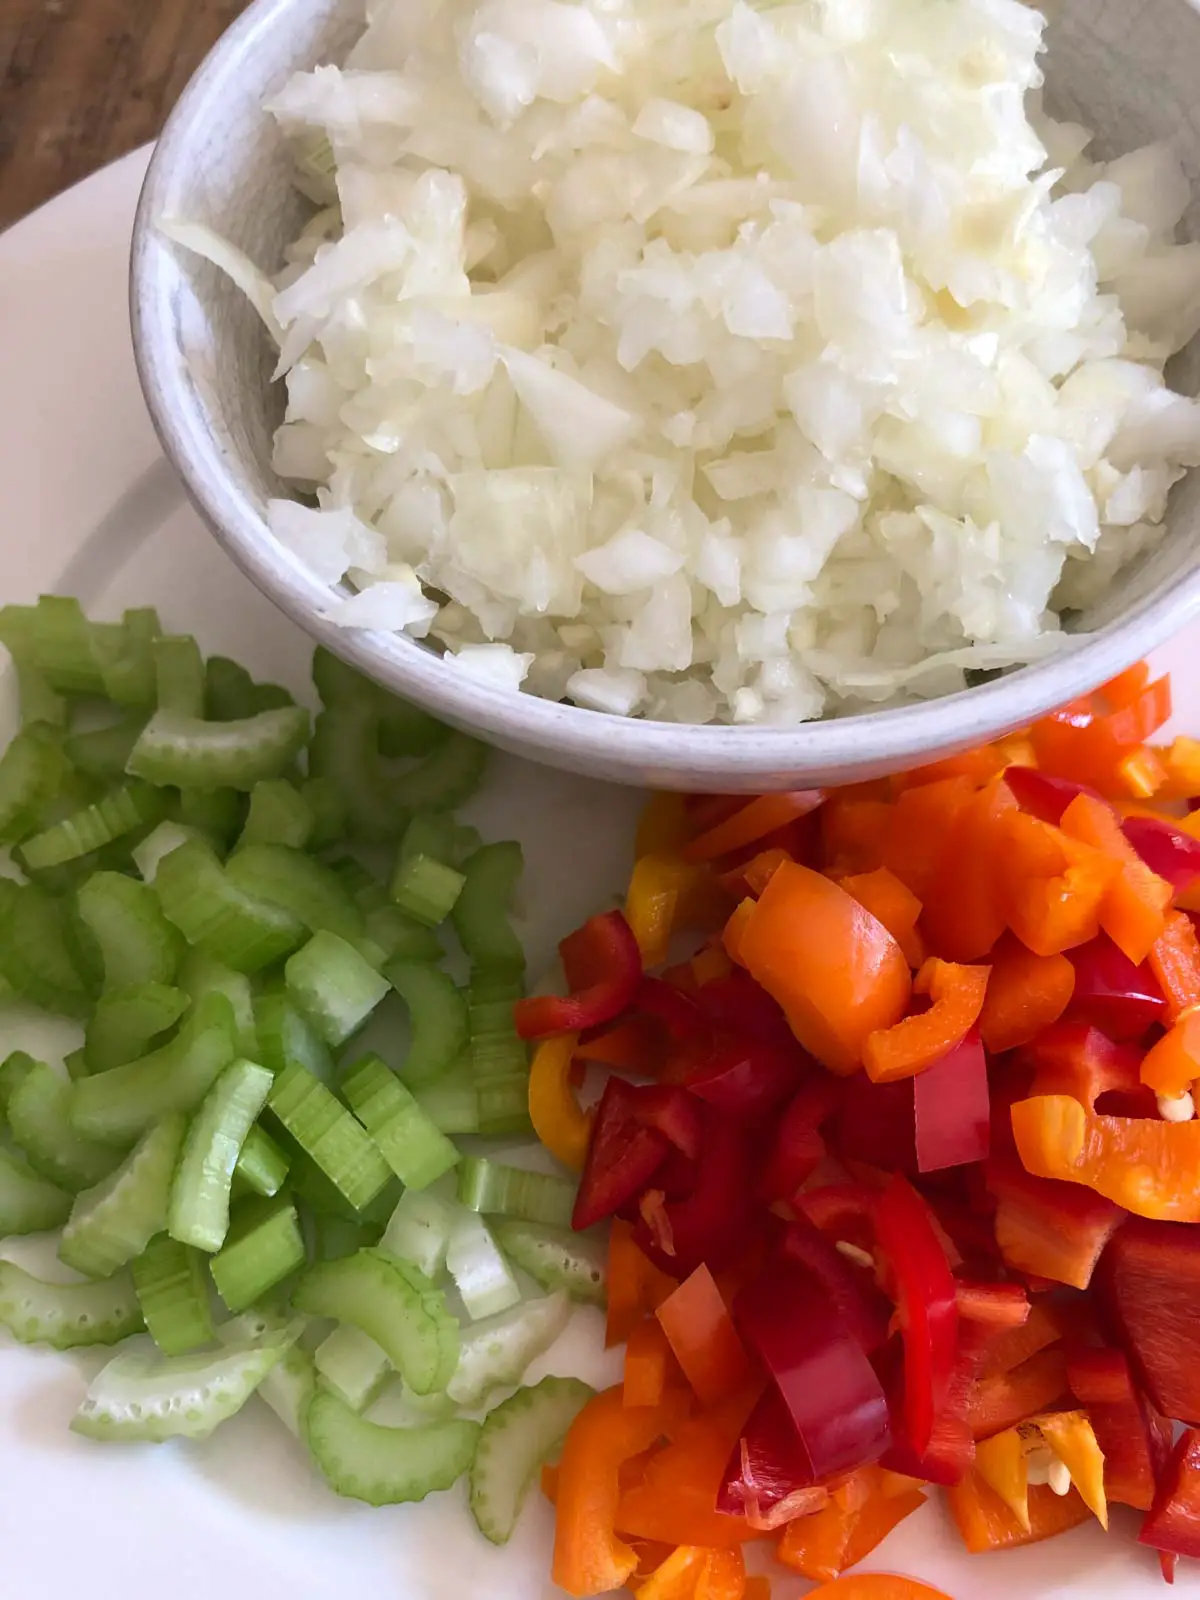 Diced onion in a white bowl, sliced celery and diced sweet bell peppers on a white plate.